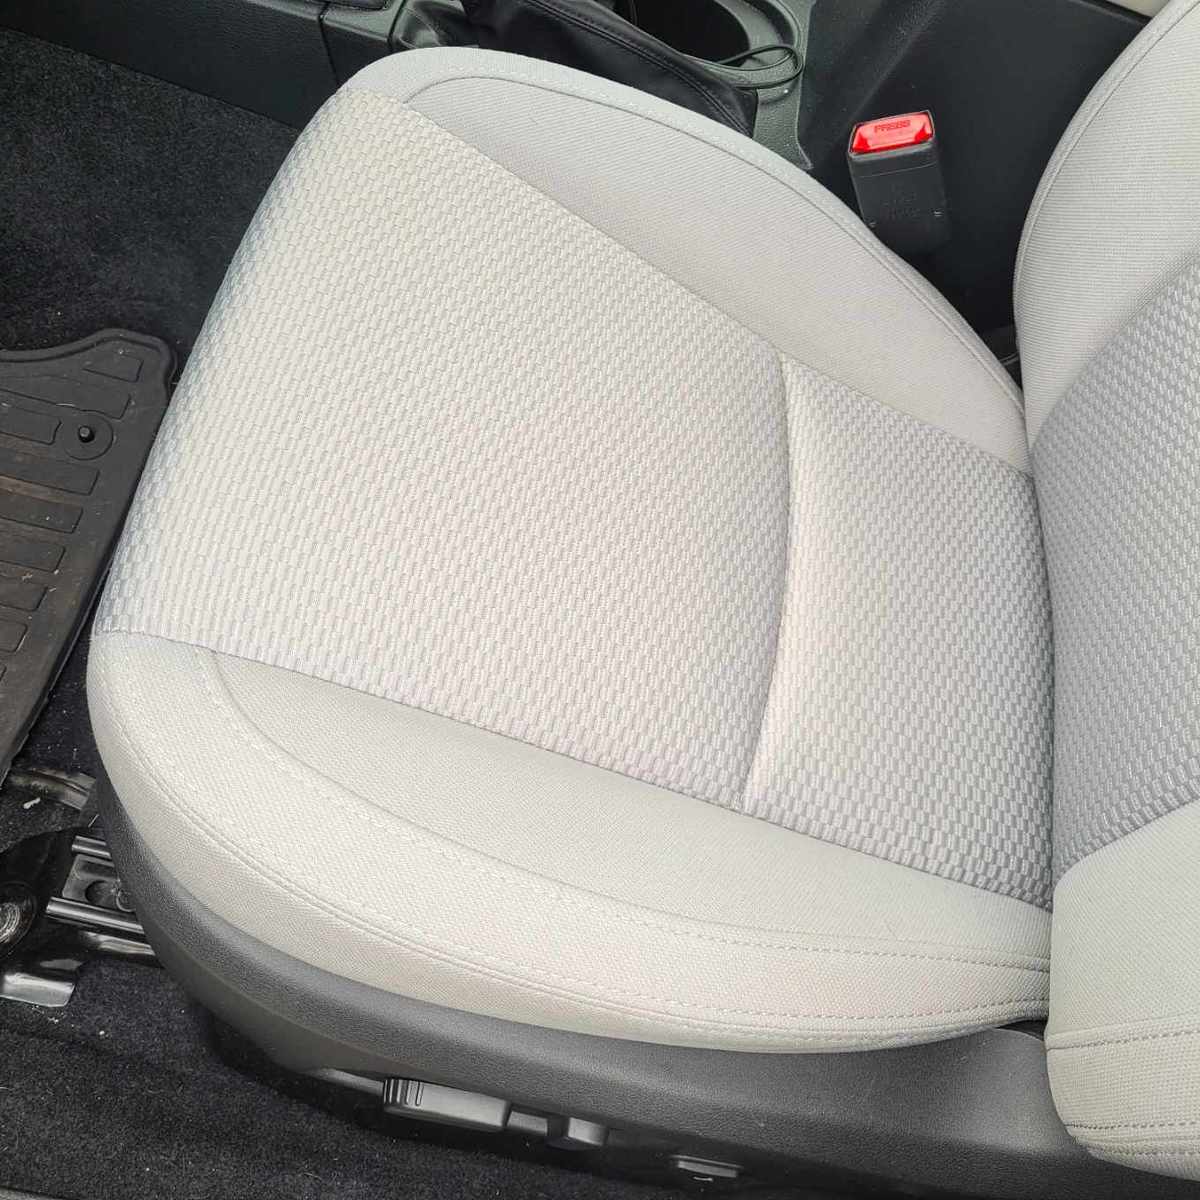 Drivers seat with grey upholstery